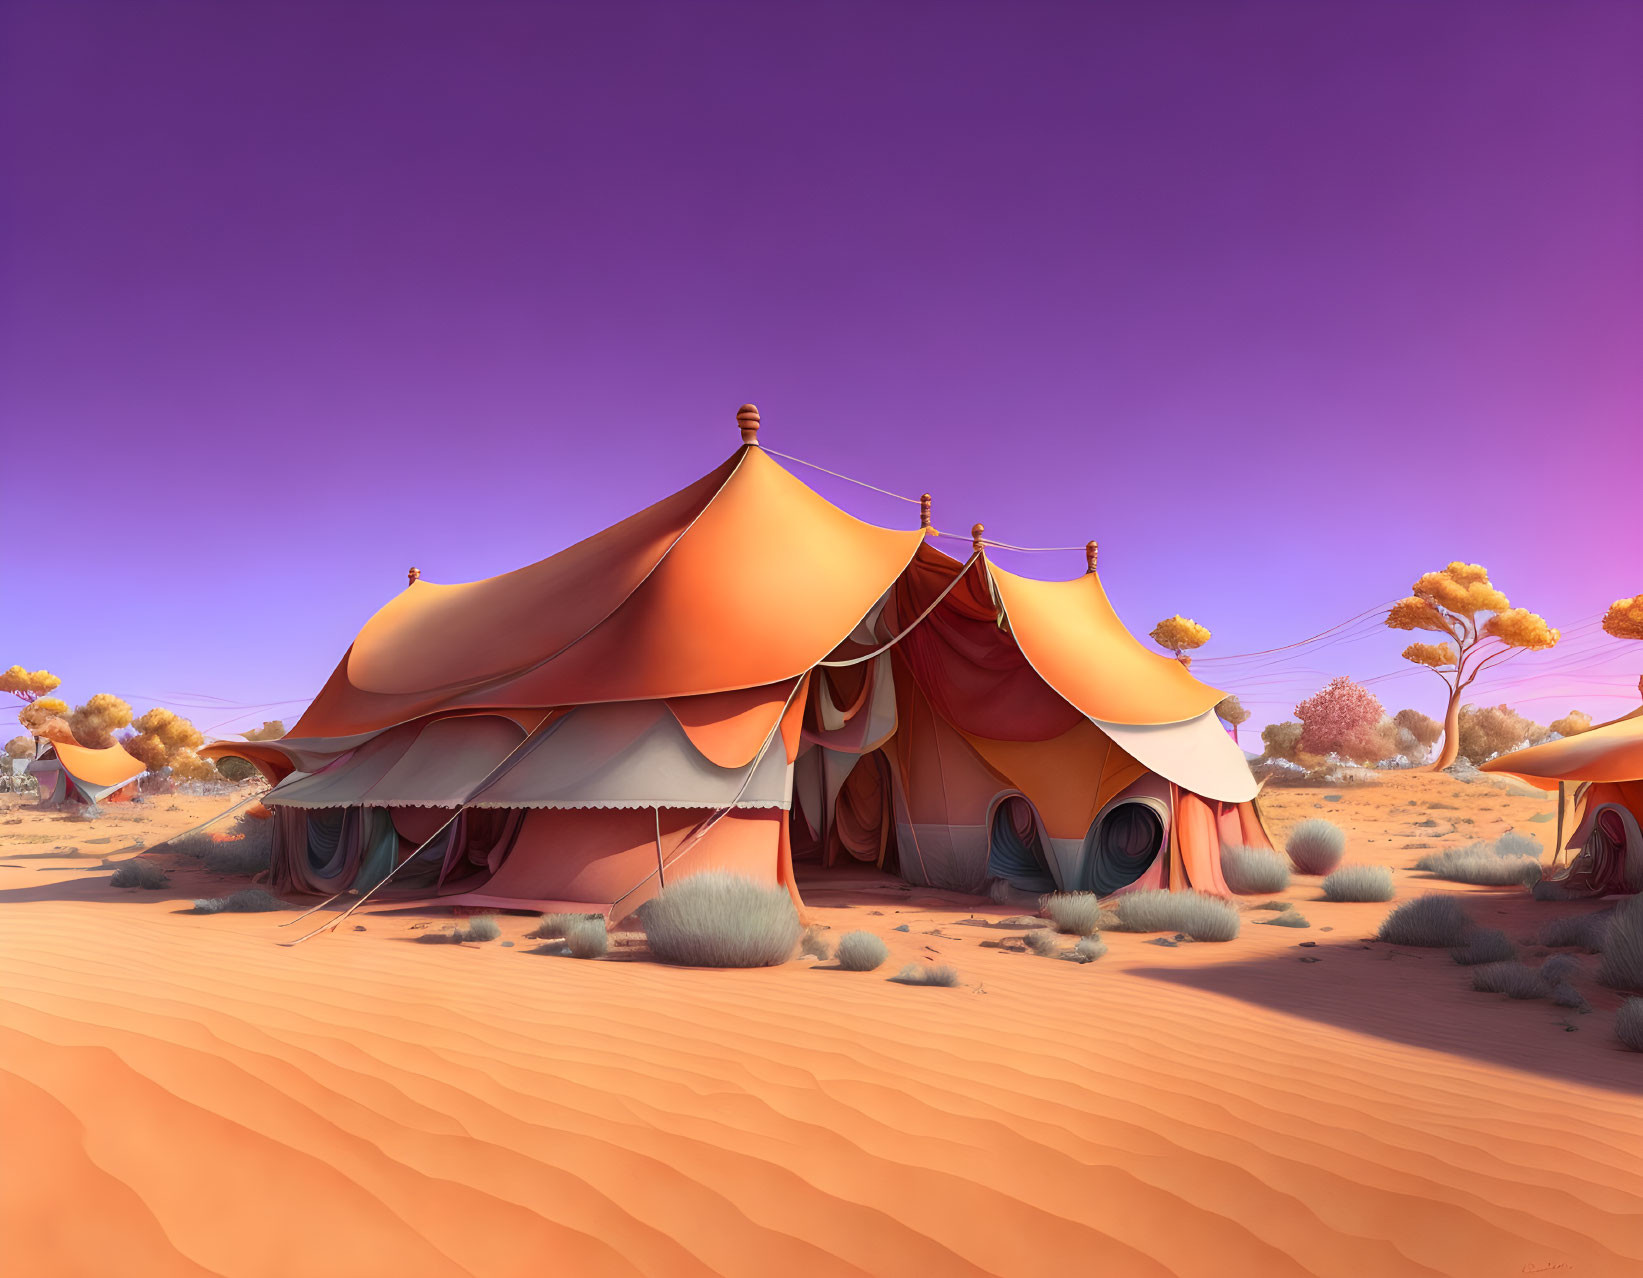 Orange tent in desert with purple skies and whimsical yellow trees